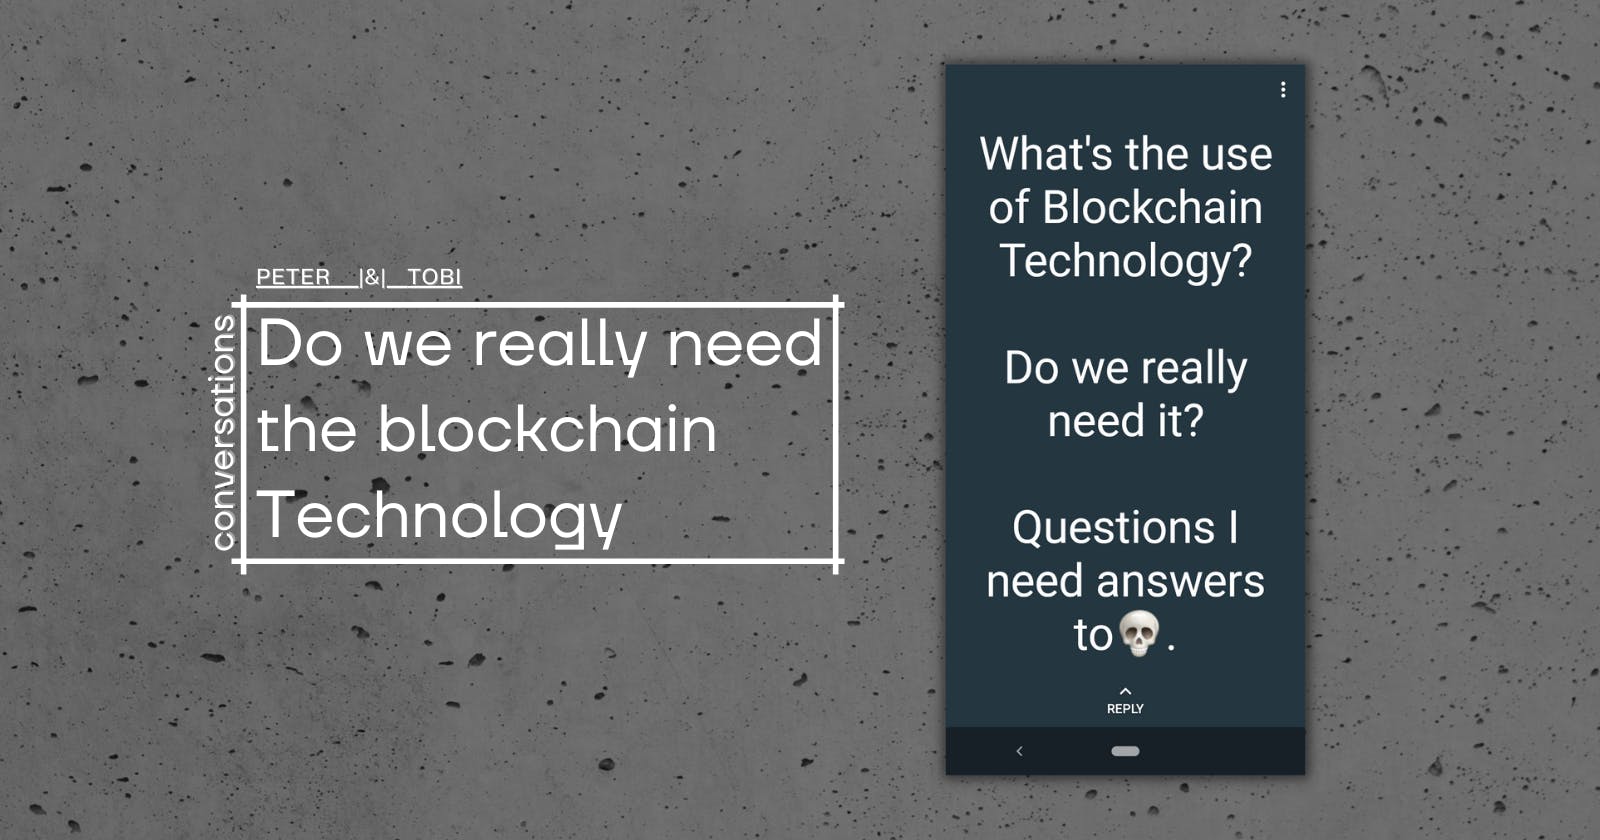 Do we really need the blockchain (picture says it)